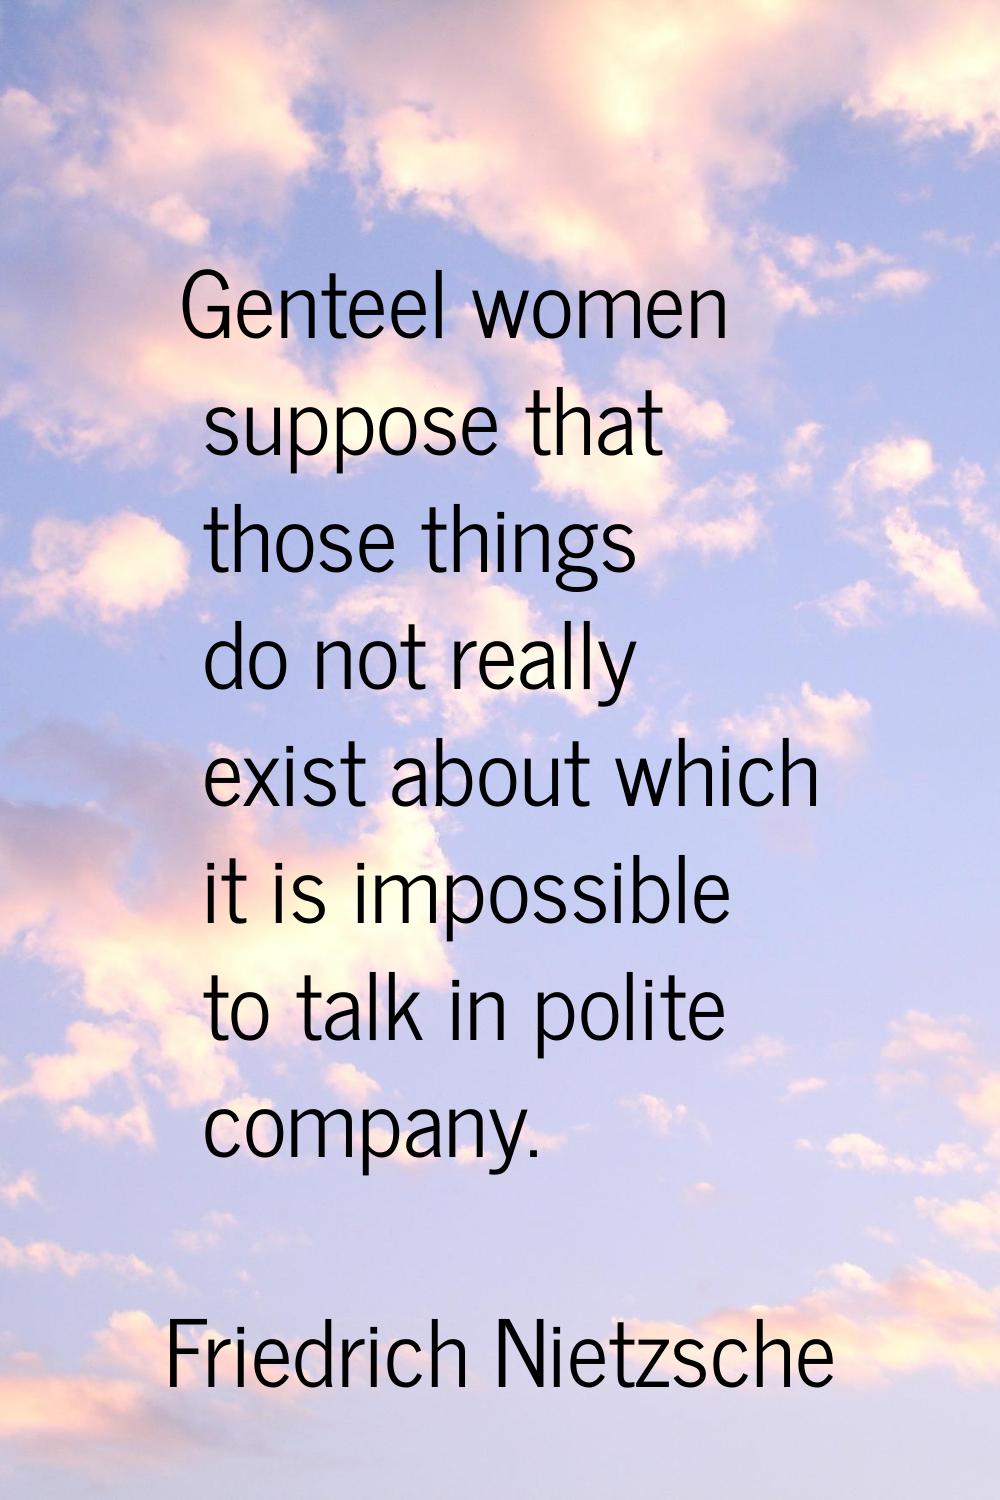 Genteel women suppose that those things do not really exist about which it is impossible to talk in